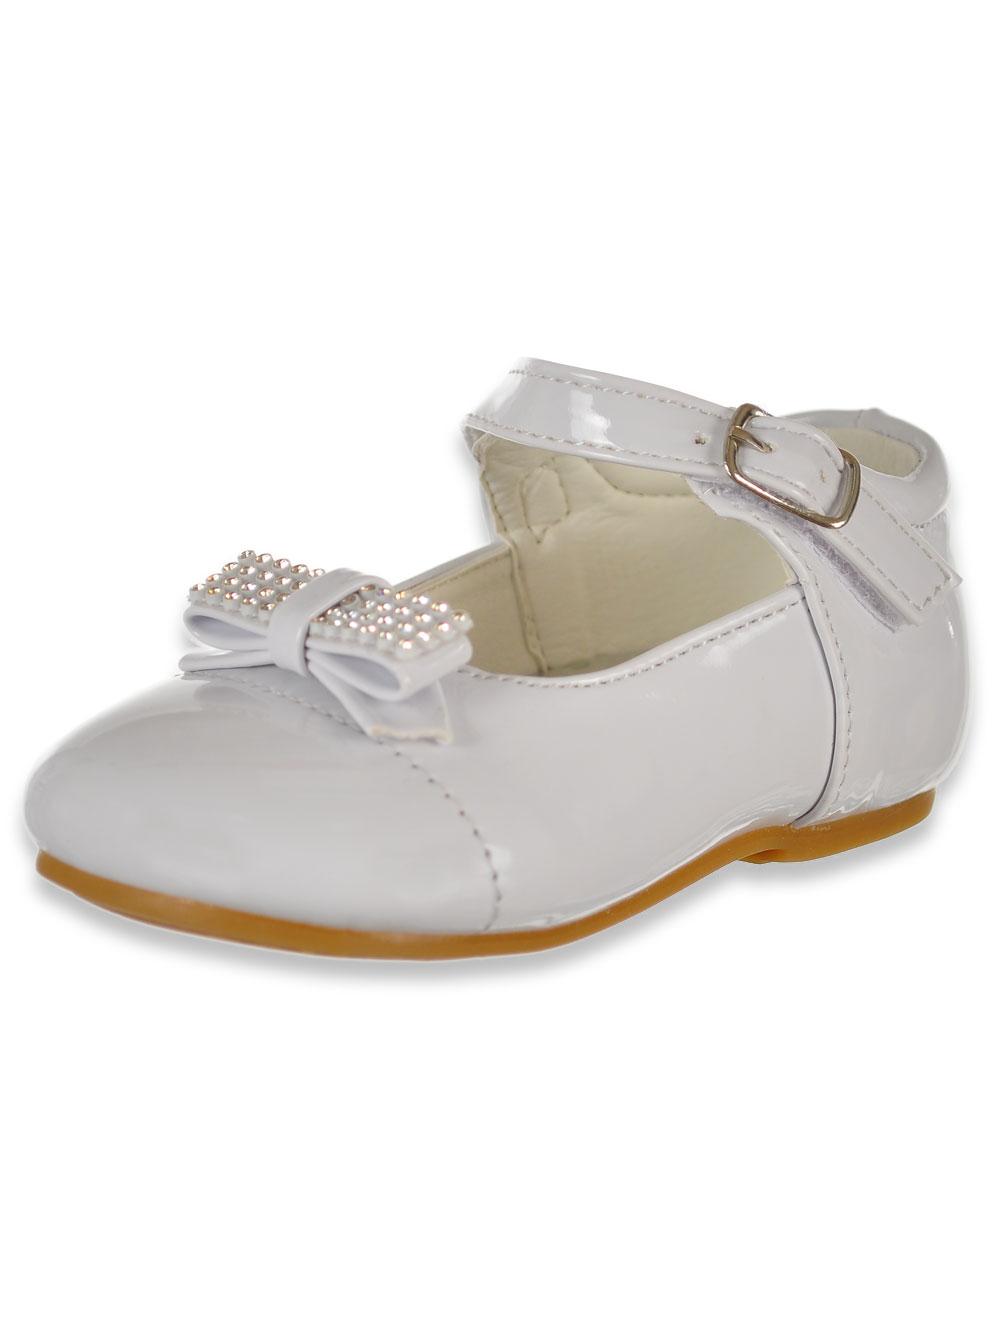 Girls' Bow-Tie Mary Janes Shoes